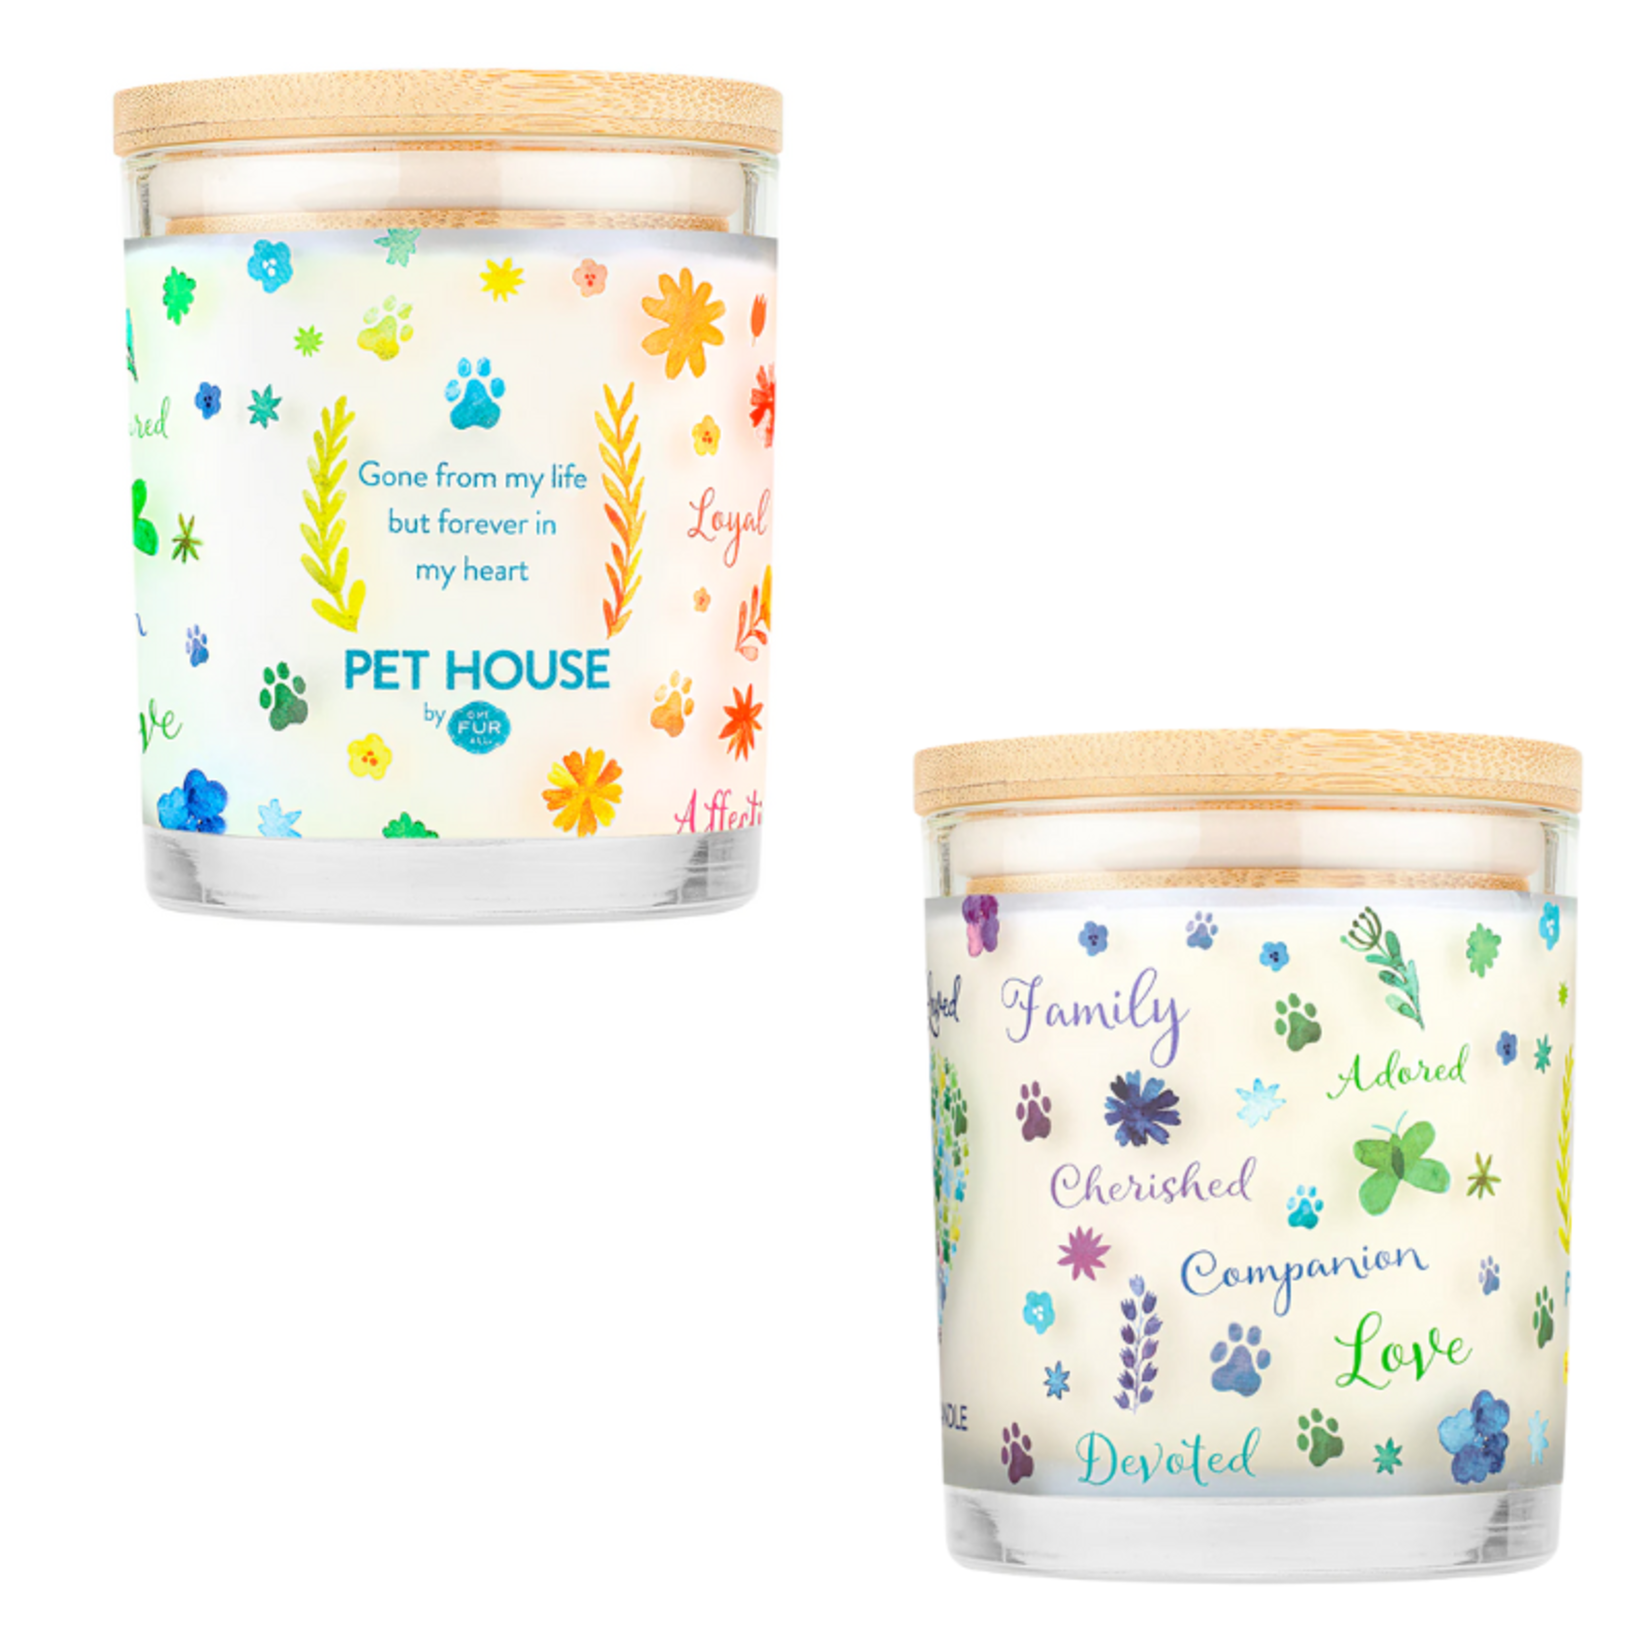 Pet House by One Fur All Scented Candle Odor Neutralizer - Natural Plant-Based Wax - Pet House